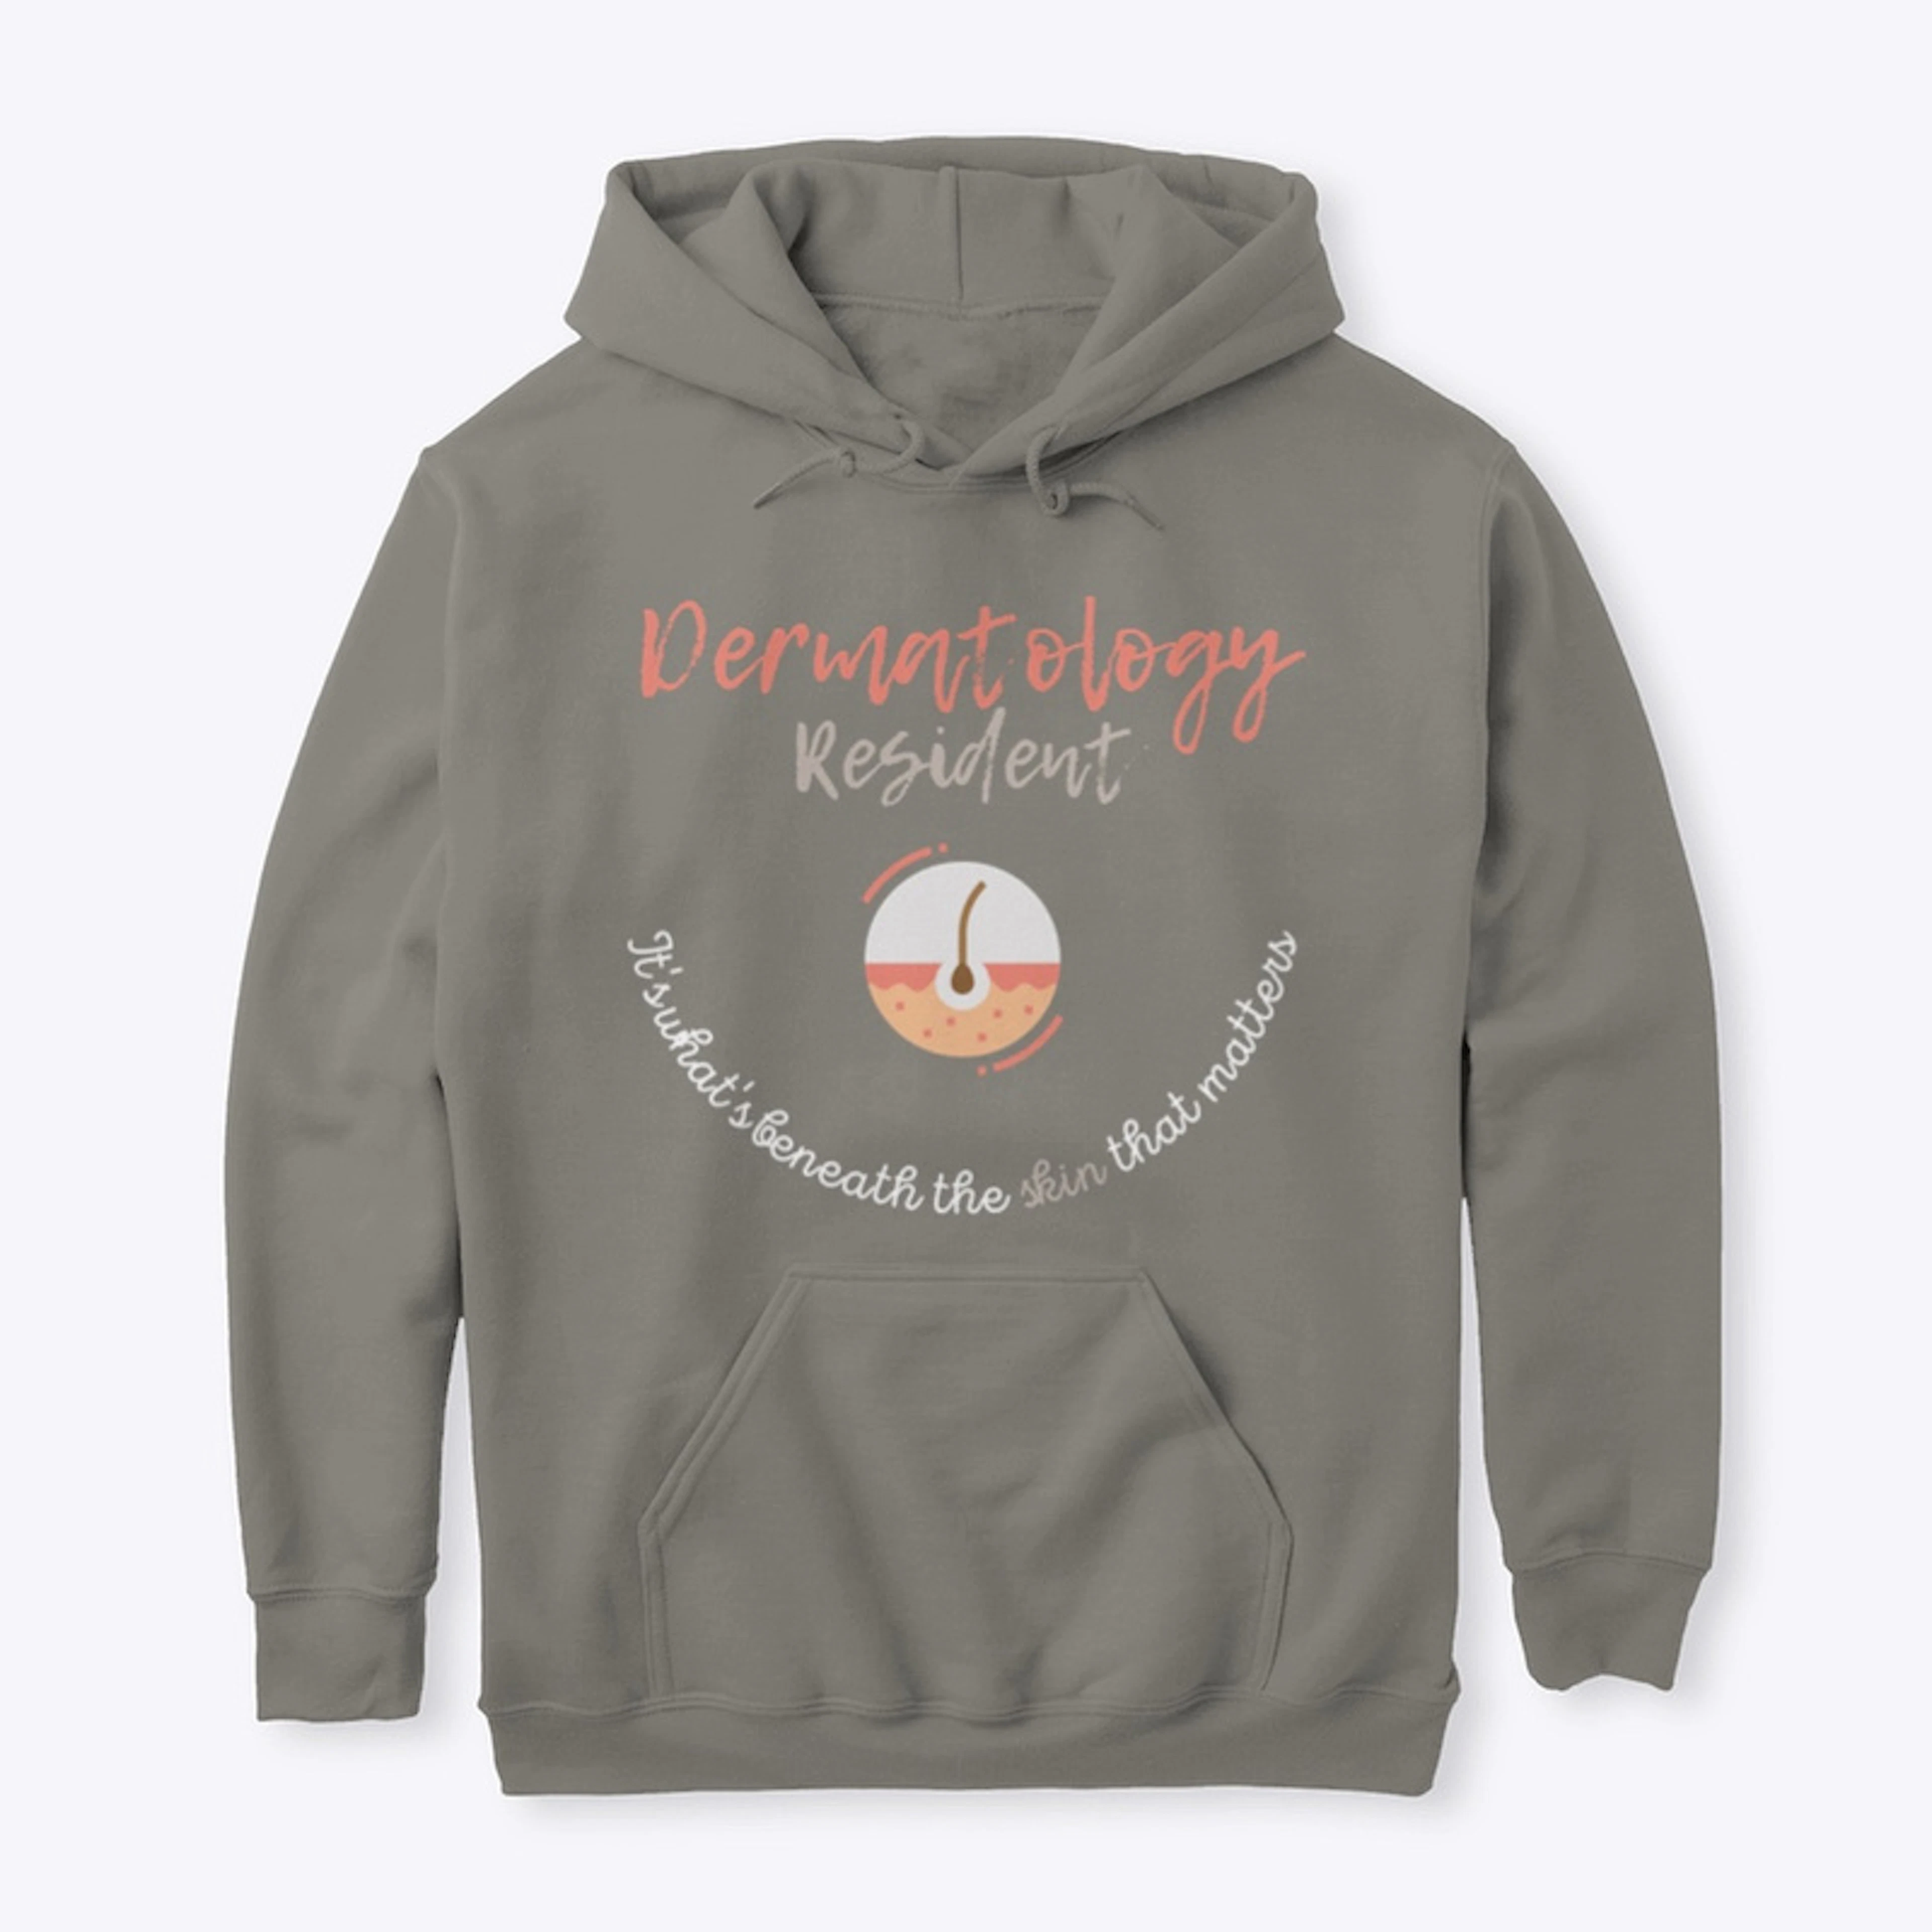 The Dermatology Resident (multi colors)